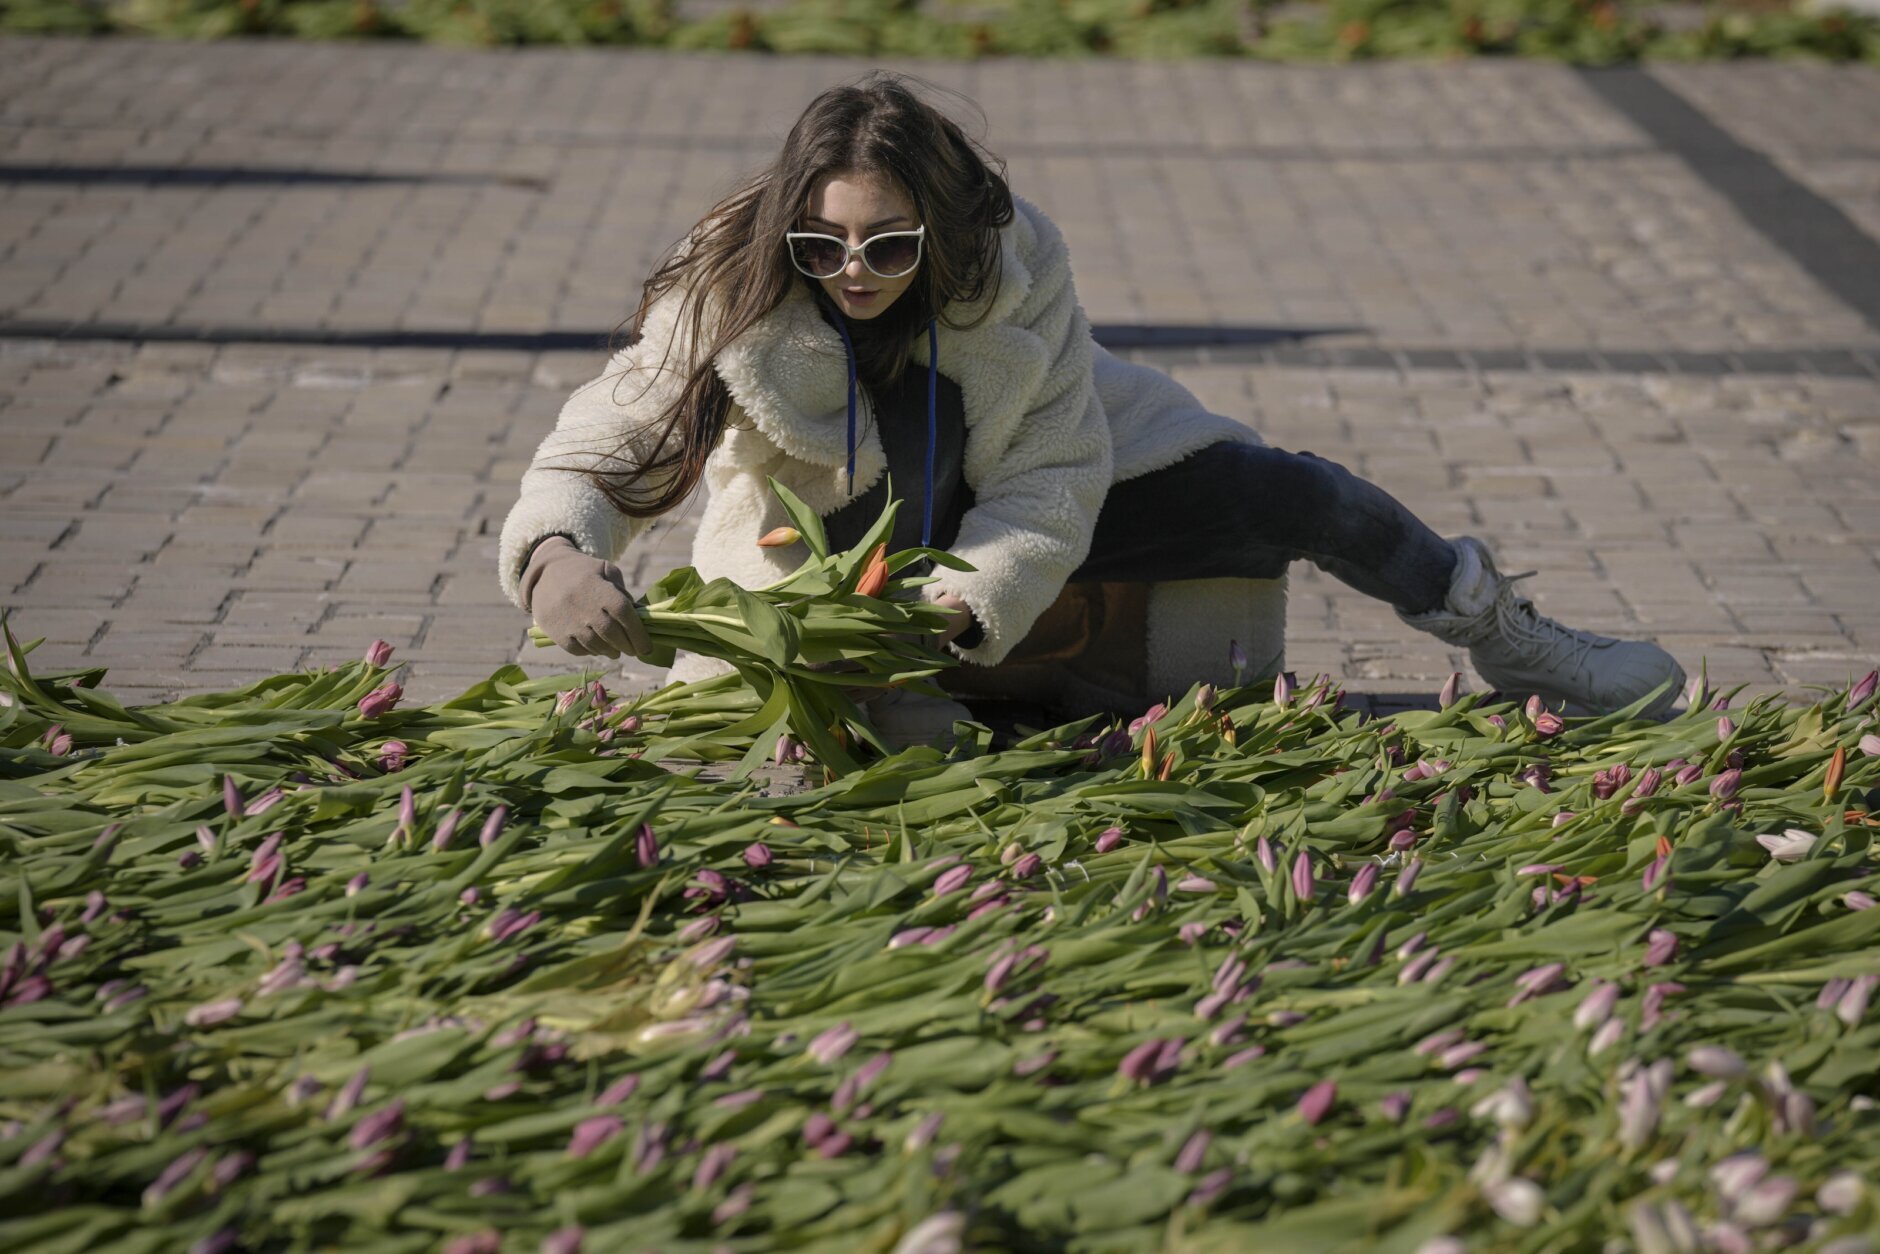 A woman arranges bunches of tulips on the pavement in Sophia square in Kyiv, Ukraine, Friday, March 18, 2022. (AP Photo/Vadim Ghirda)